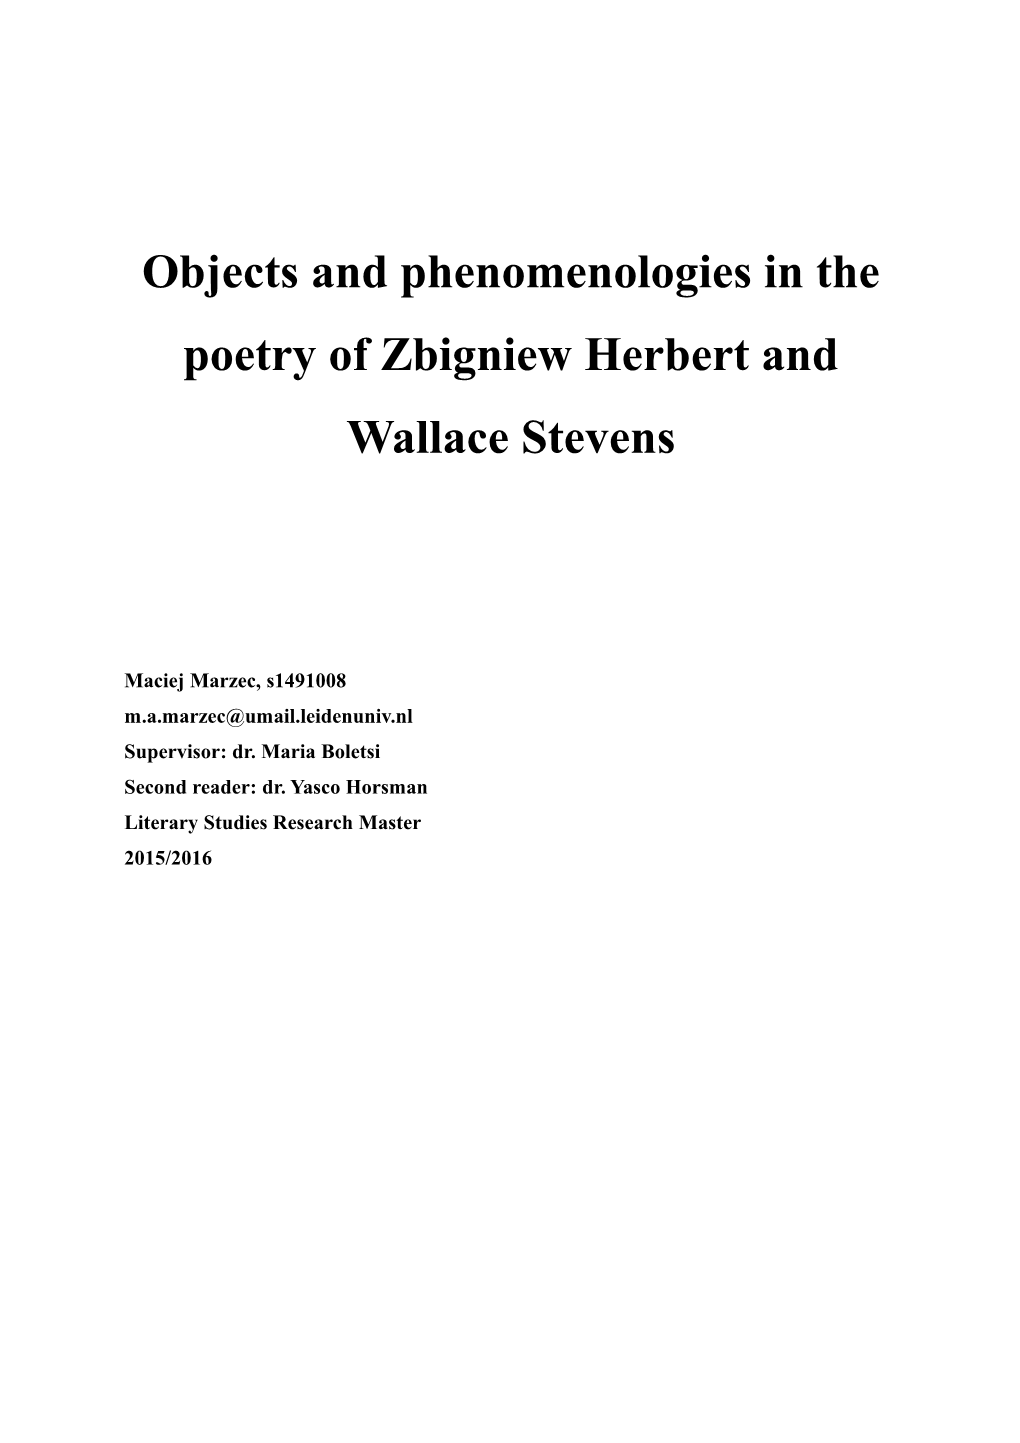 Objects and Phenomenologies in the Poetry of Zbigniew Herbert and Wallace Stevens